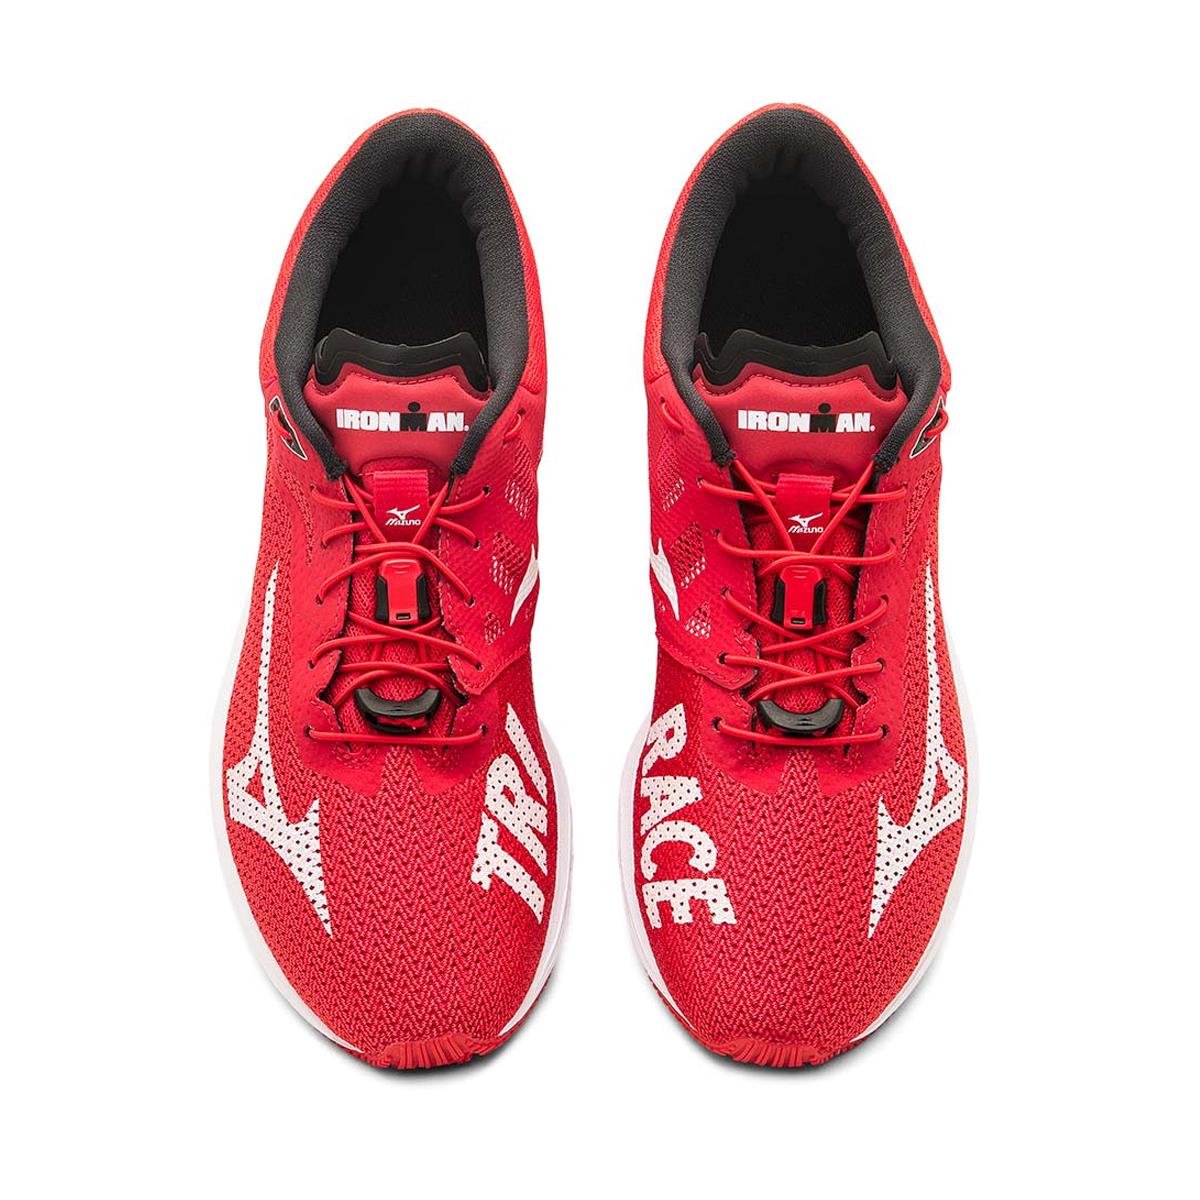 Carelessness dispatch Temperate Mizuno Wave Sonic Tri Ironman Outlet, GET 58% OFF, pinkrestaurant.ie